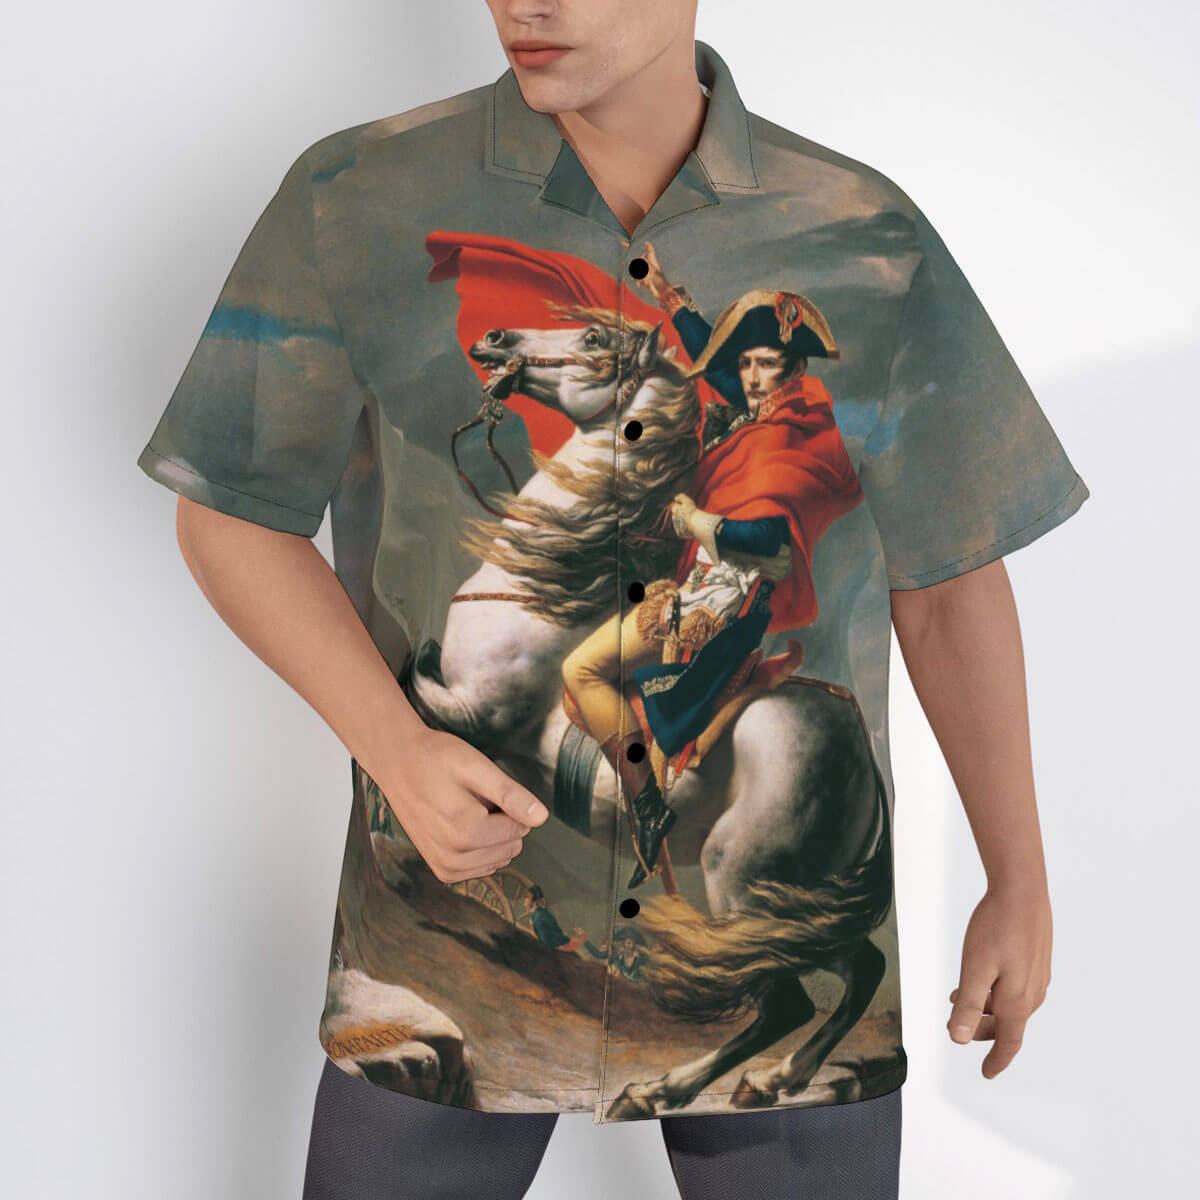 Napoleon Crossing the Alps shirt paired with casual wear